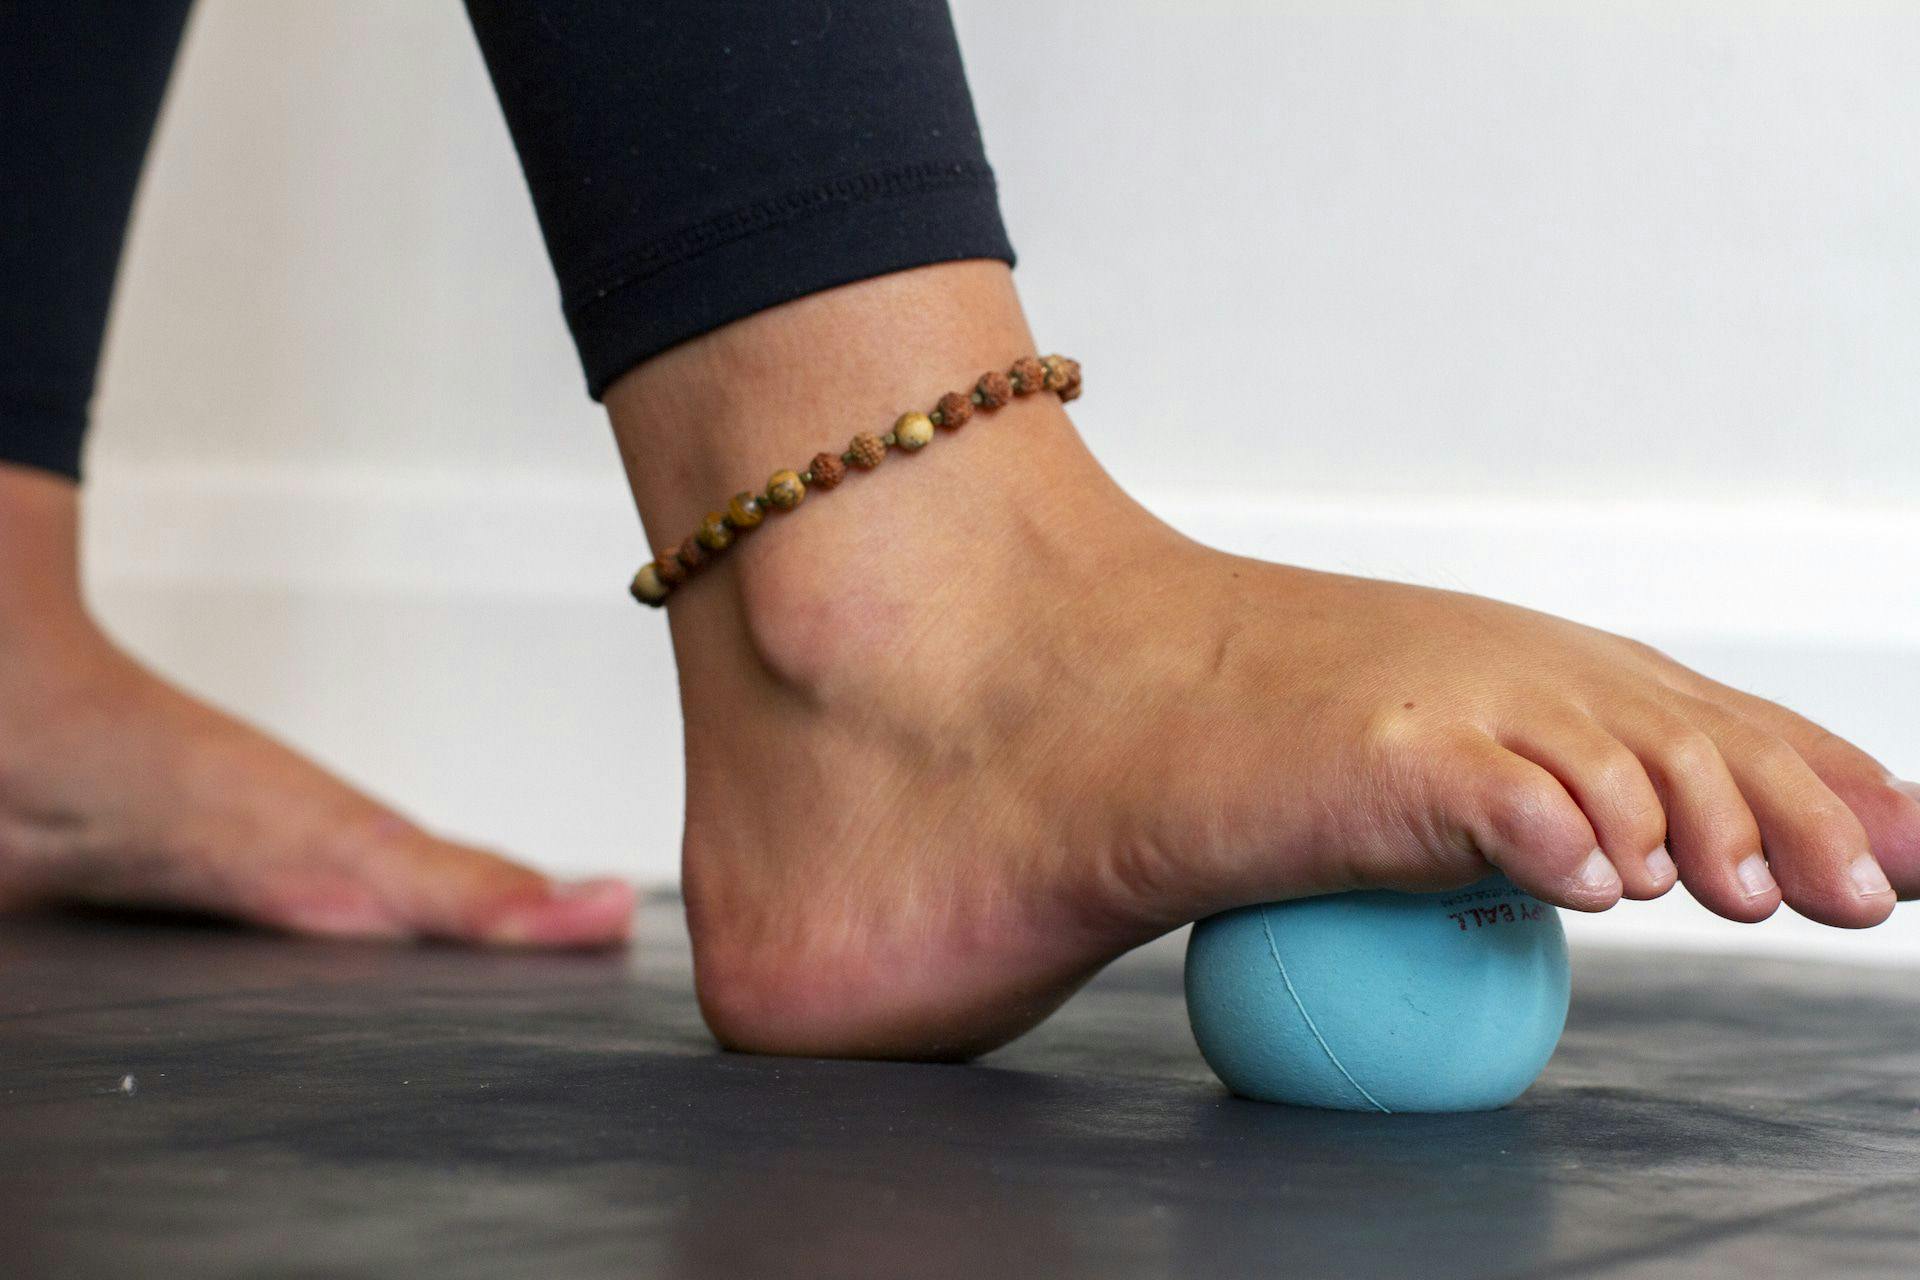 How massaging your feet can release your entire body